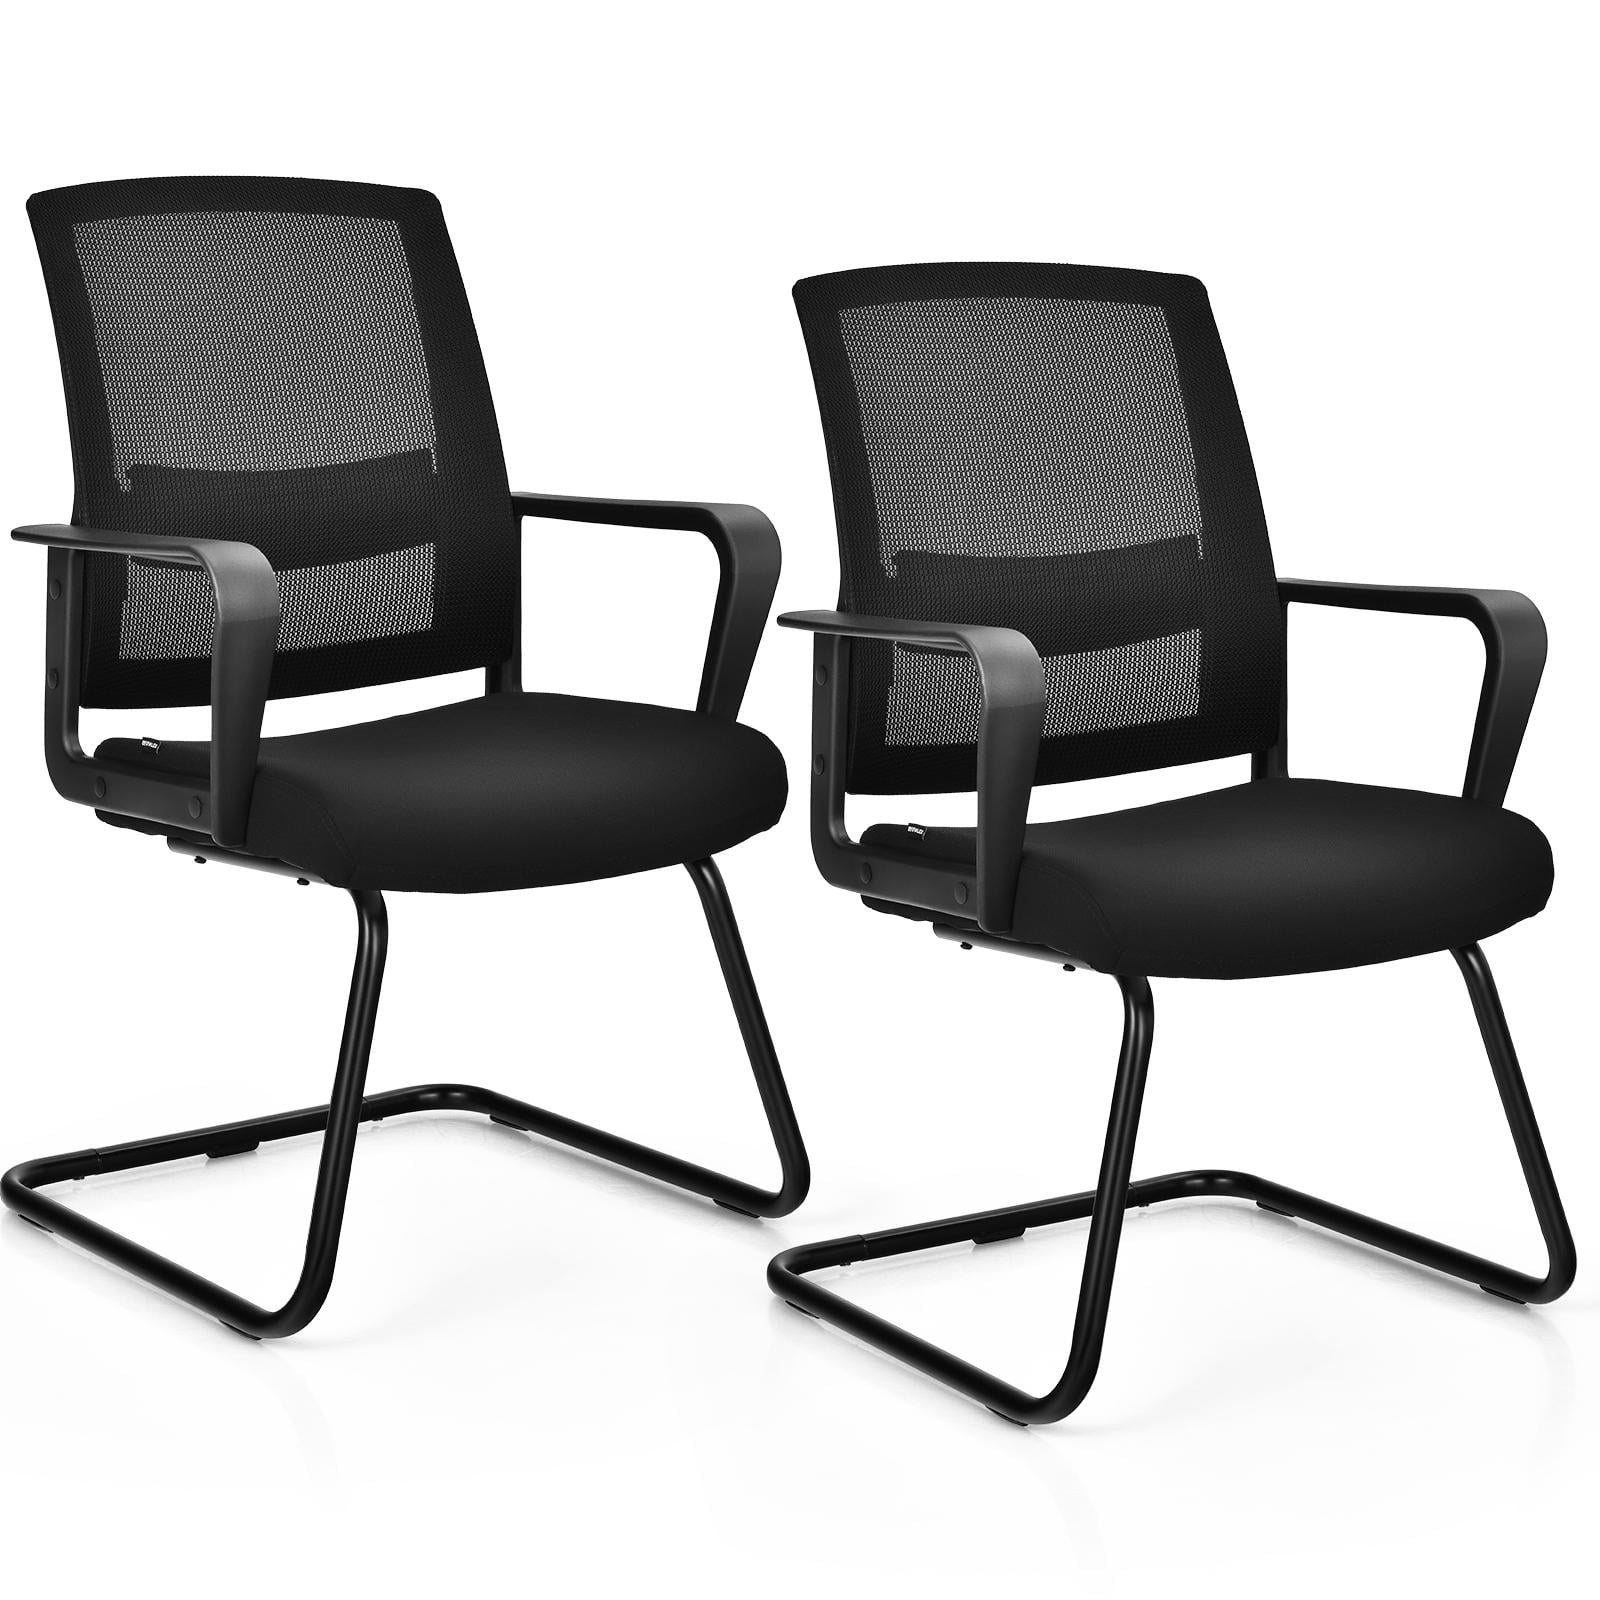  Giantex Office Reception Chairs Set - Guest Chairs